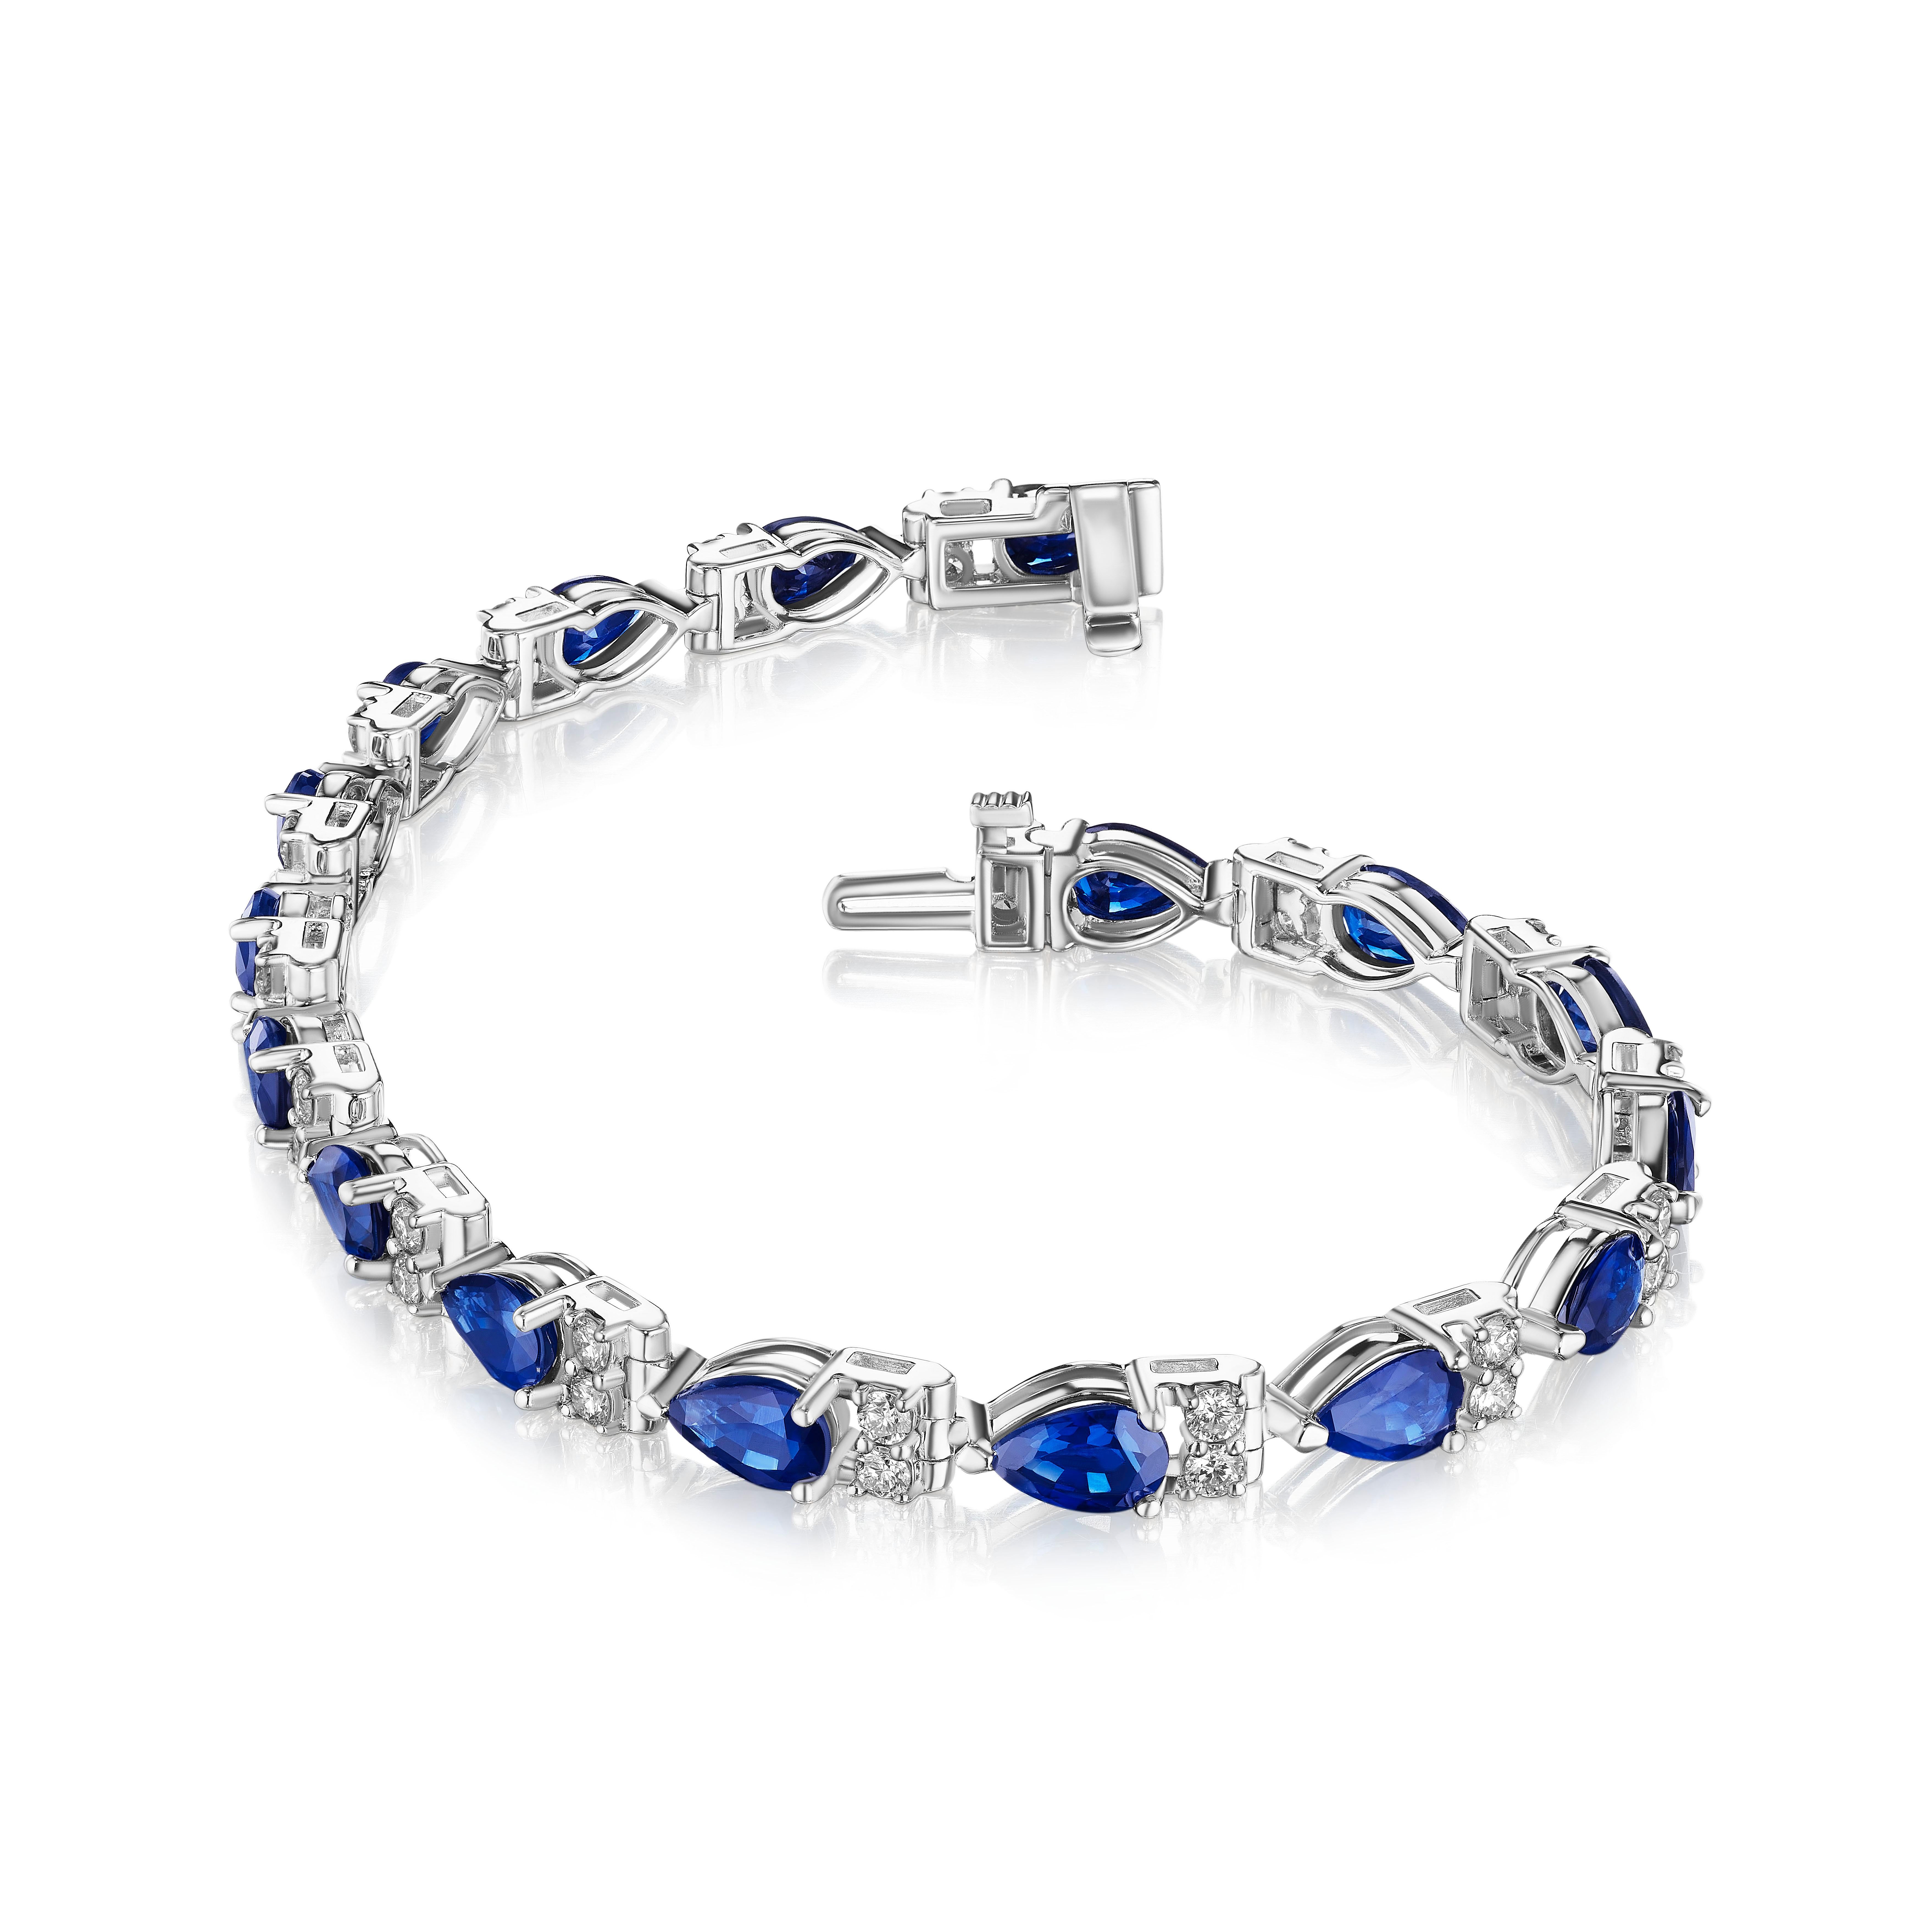 Contemporary 9.50ct Pear Shape Sapphire & Round Diamond Bracelet in 14KT Gold For Sale